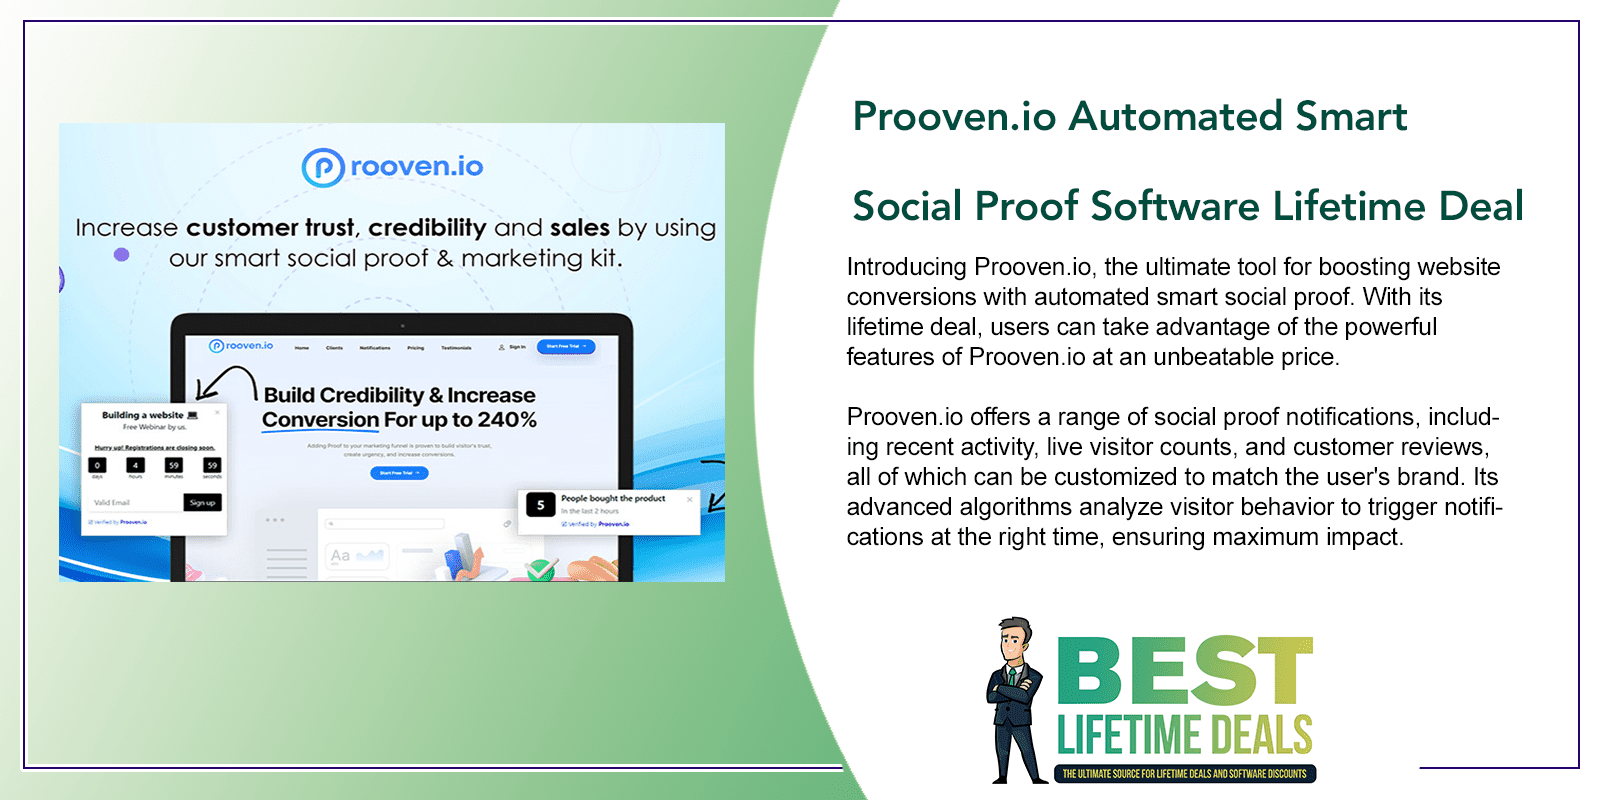 Prooven.io Automated Smart Social Proof Software Featured Image